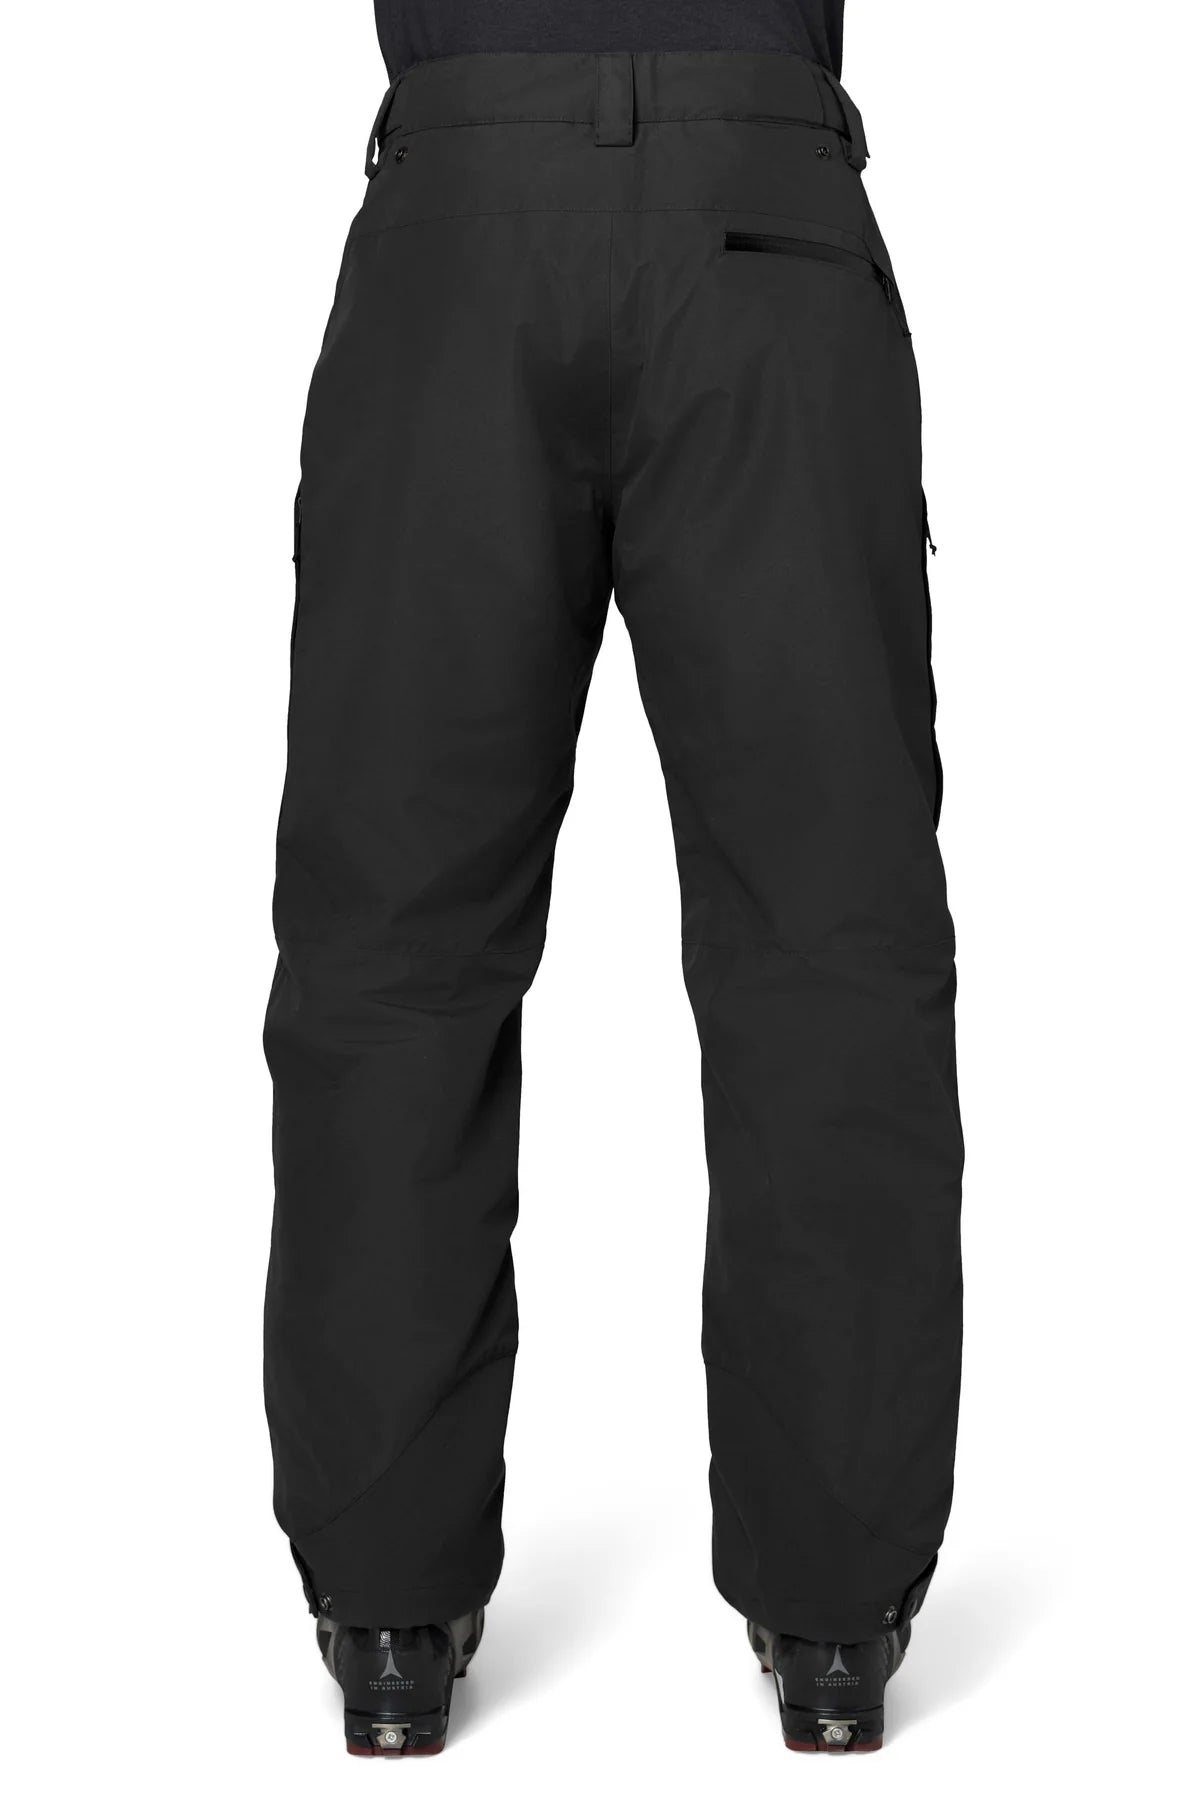 Flylow Men's Snowman Insulated Pant – Down Wind Sports